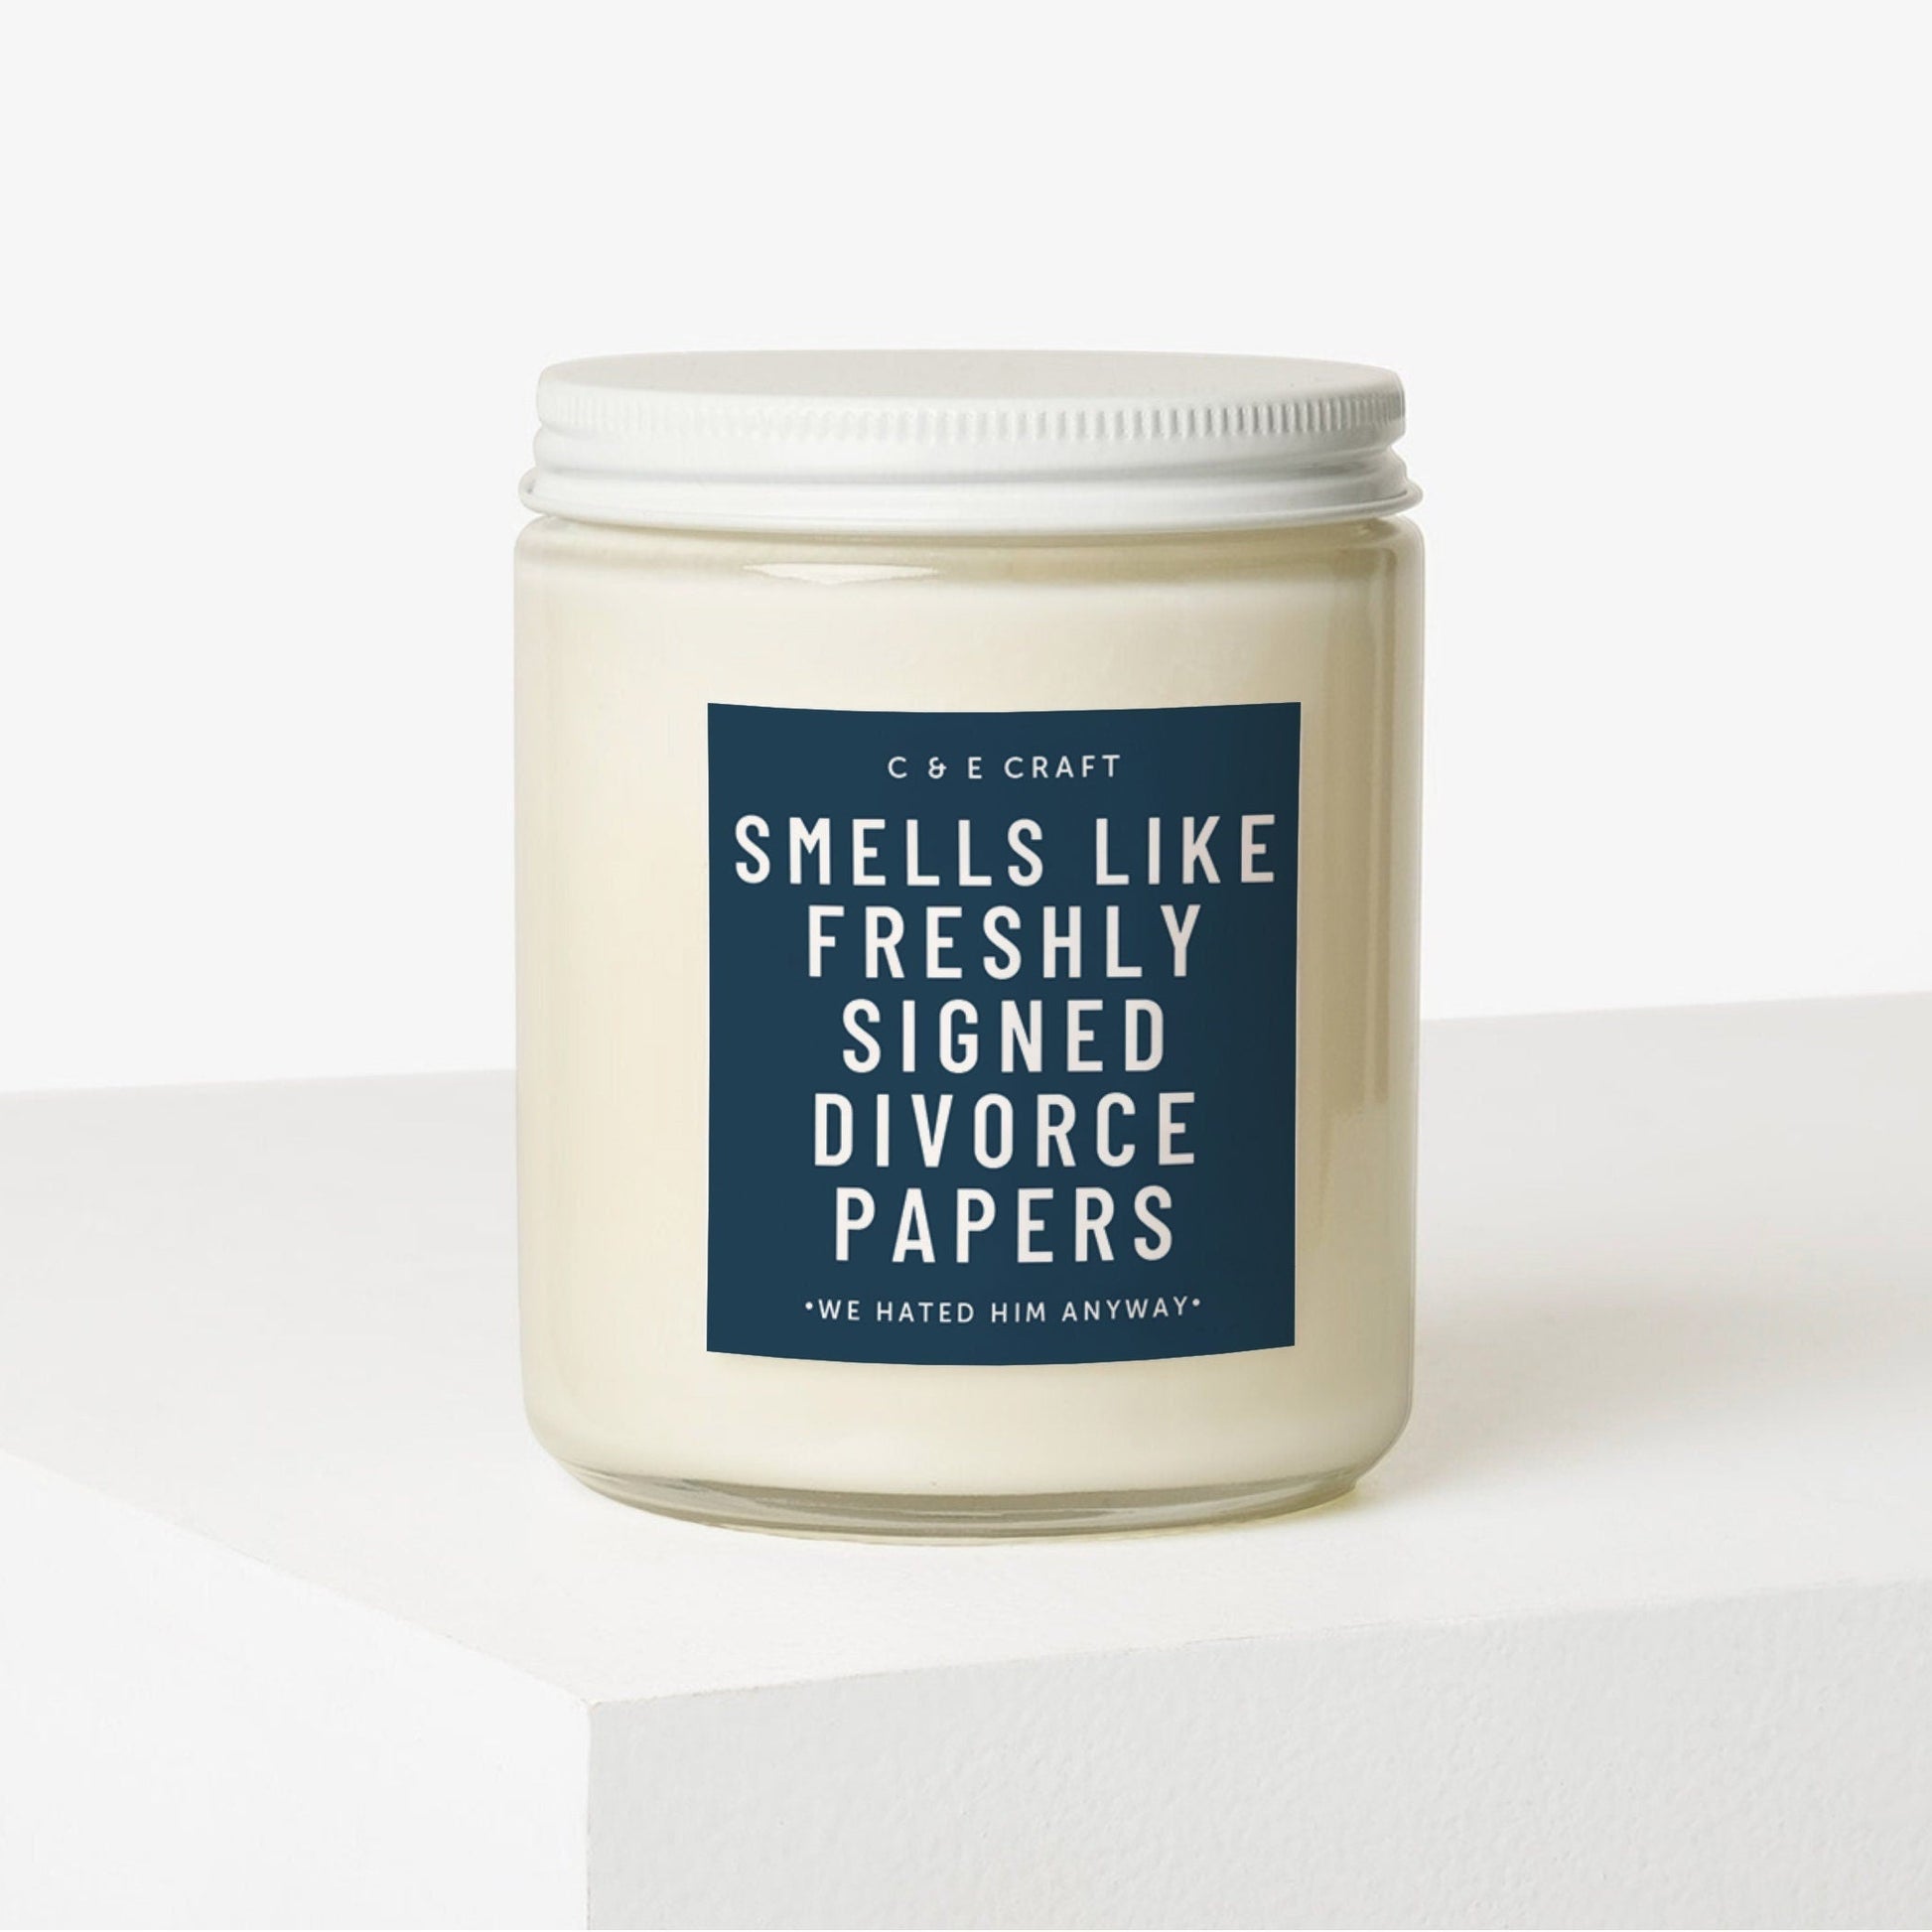 Smells Like Freshly Signed Divorce Papers Candle Candle CE Craft 